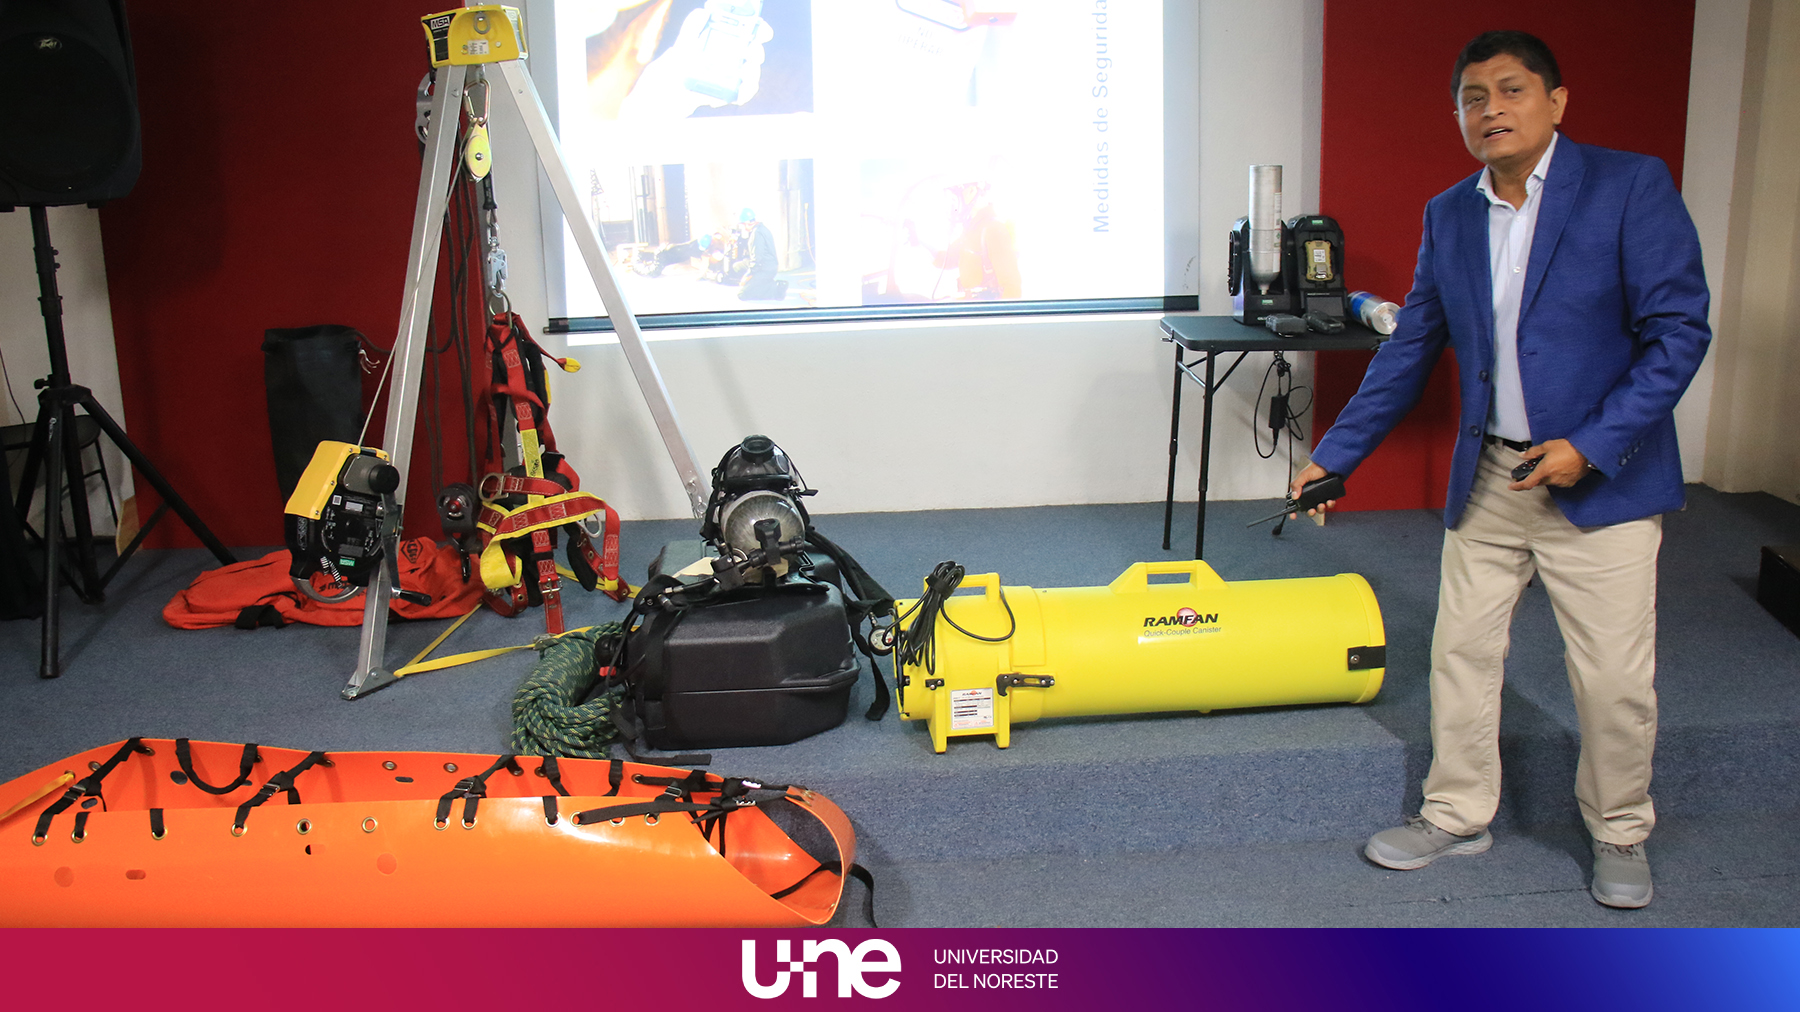 University of New England students receive a conference on equipment needed for a confined space rescue plan